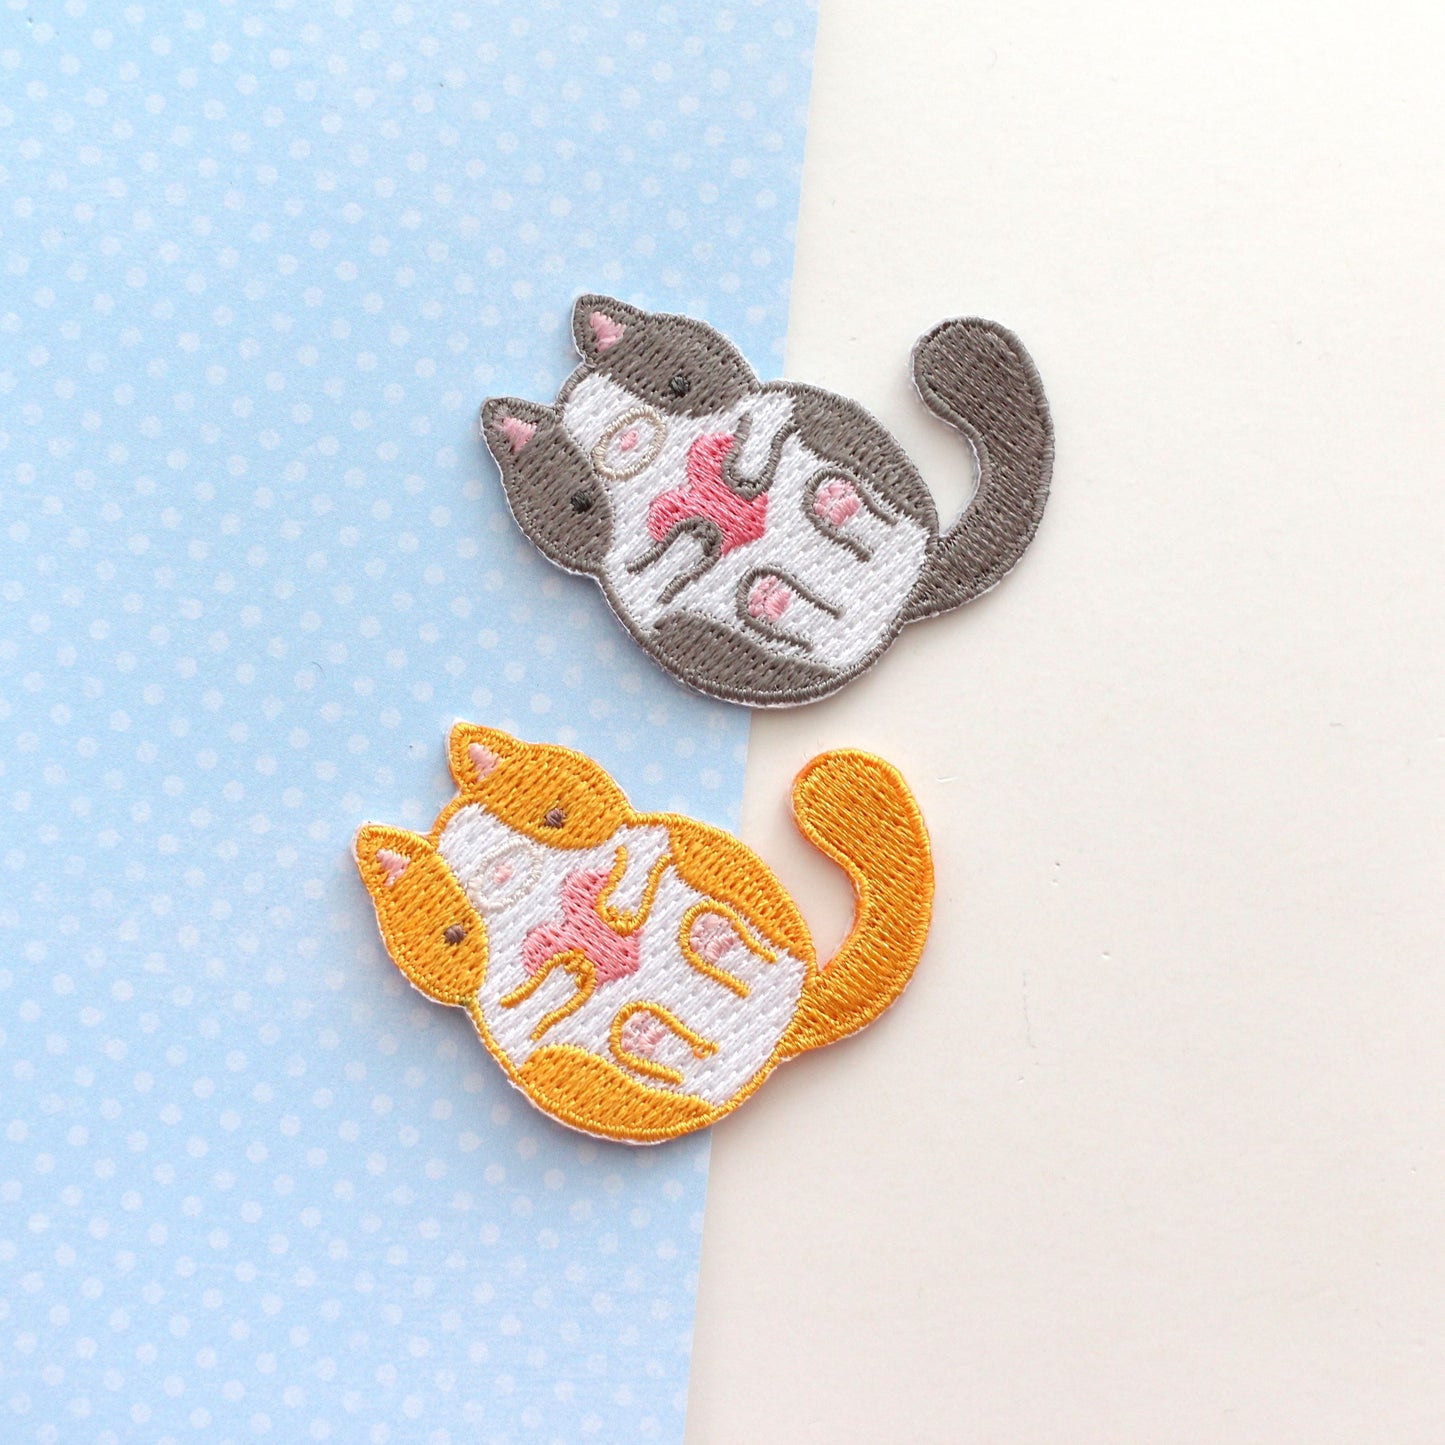 2 Cat embroidered iron on Patches. Cute Kitten Appliques by Wild Whimsy Woolies